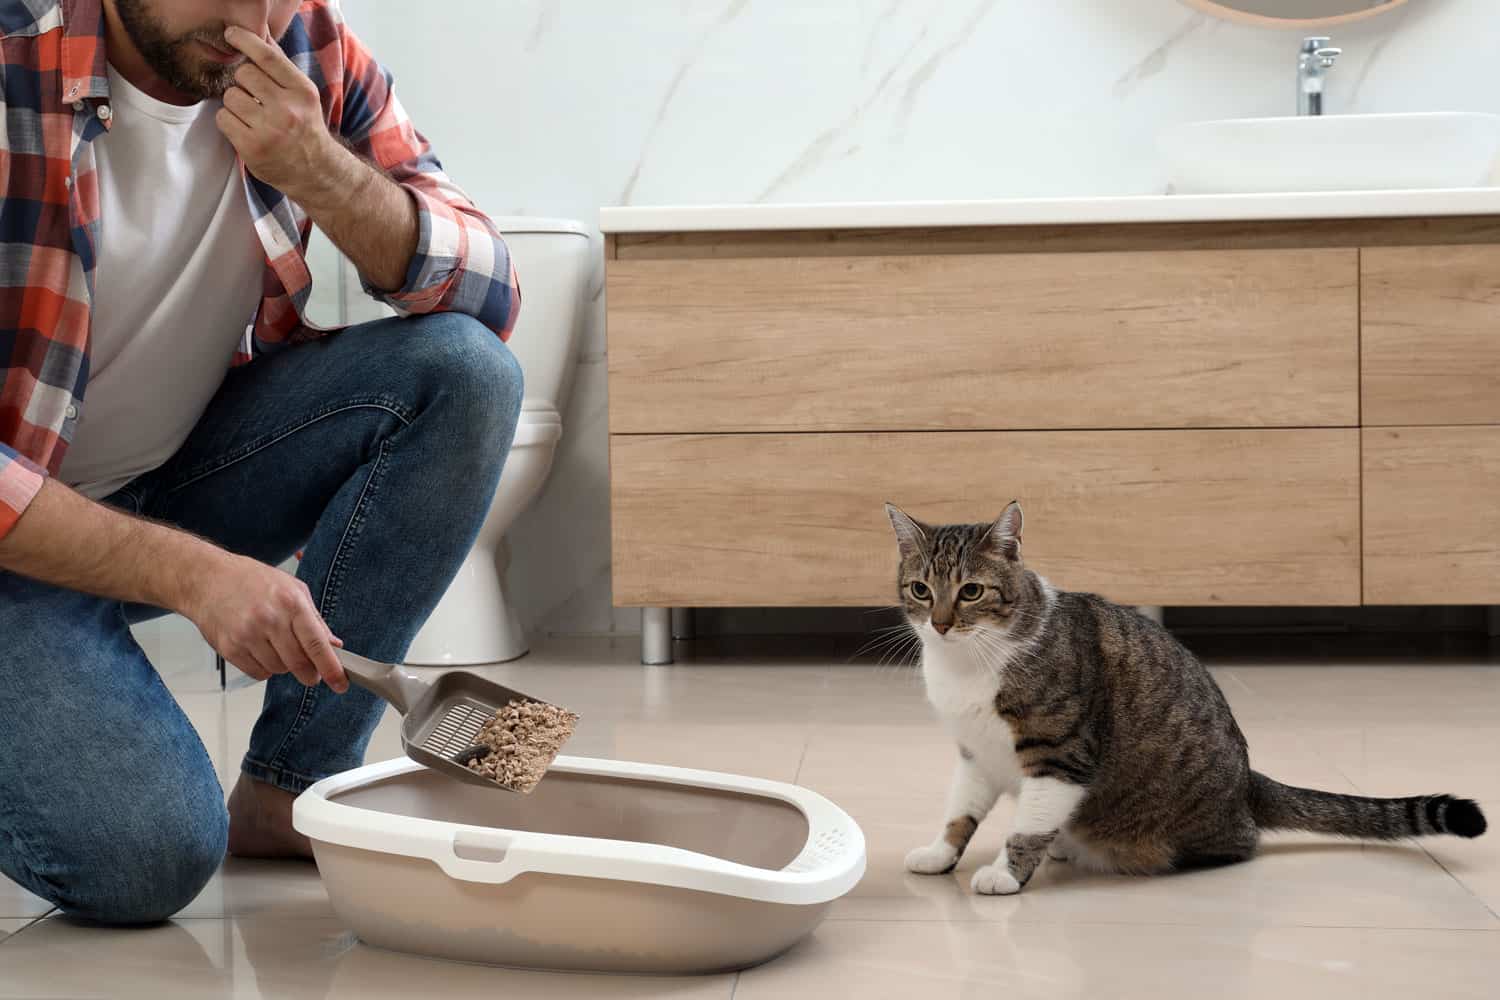 Young man in bathroom cleaning cat litter tray, holding nose due to strong odor clumping and non-clumping